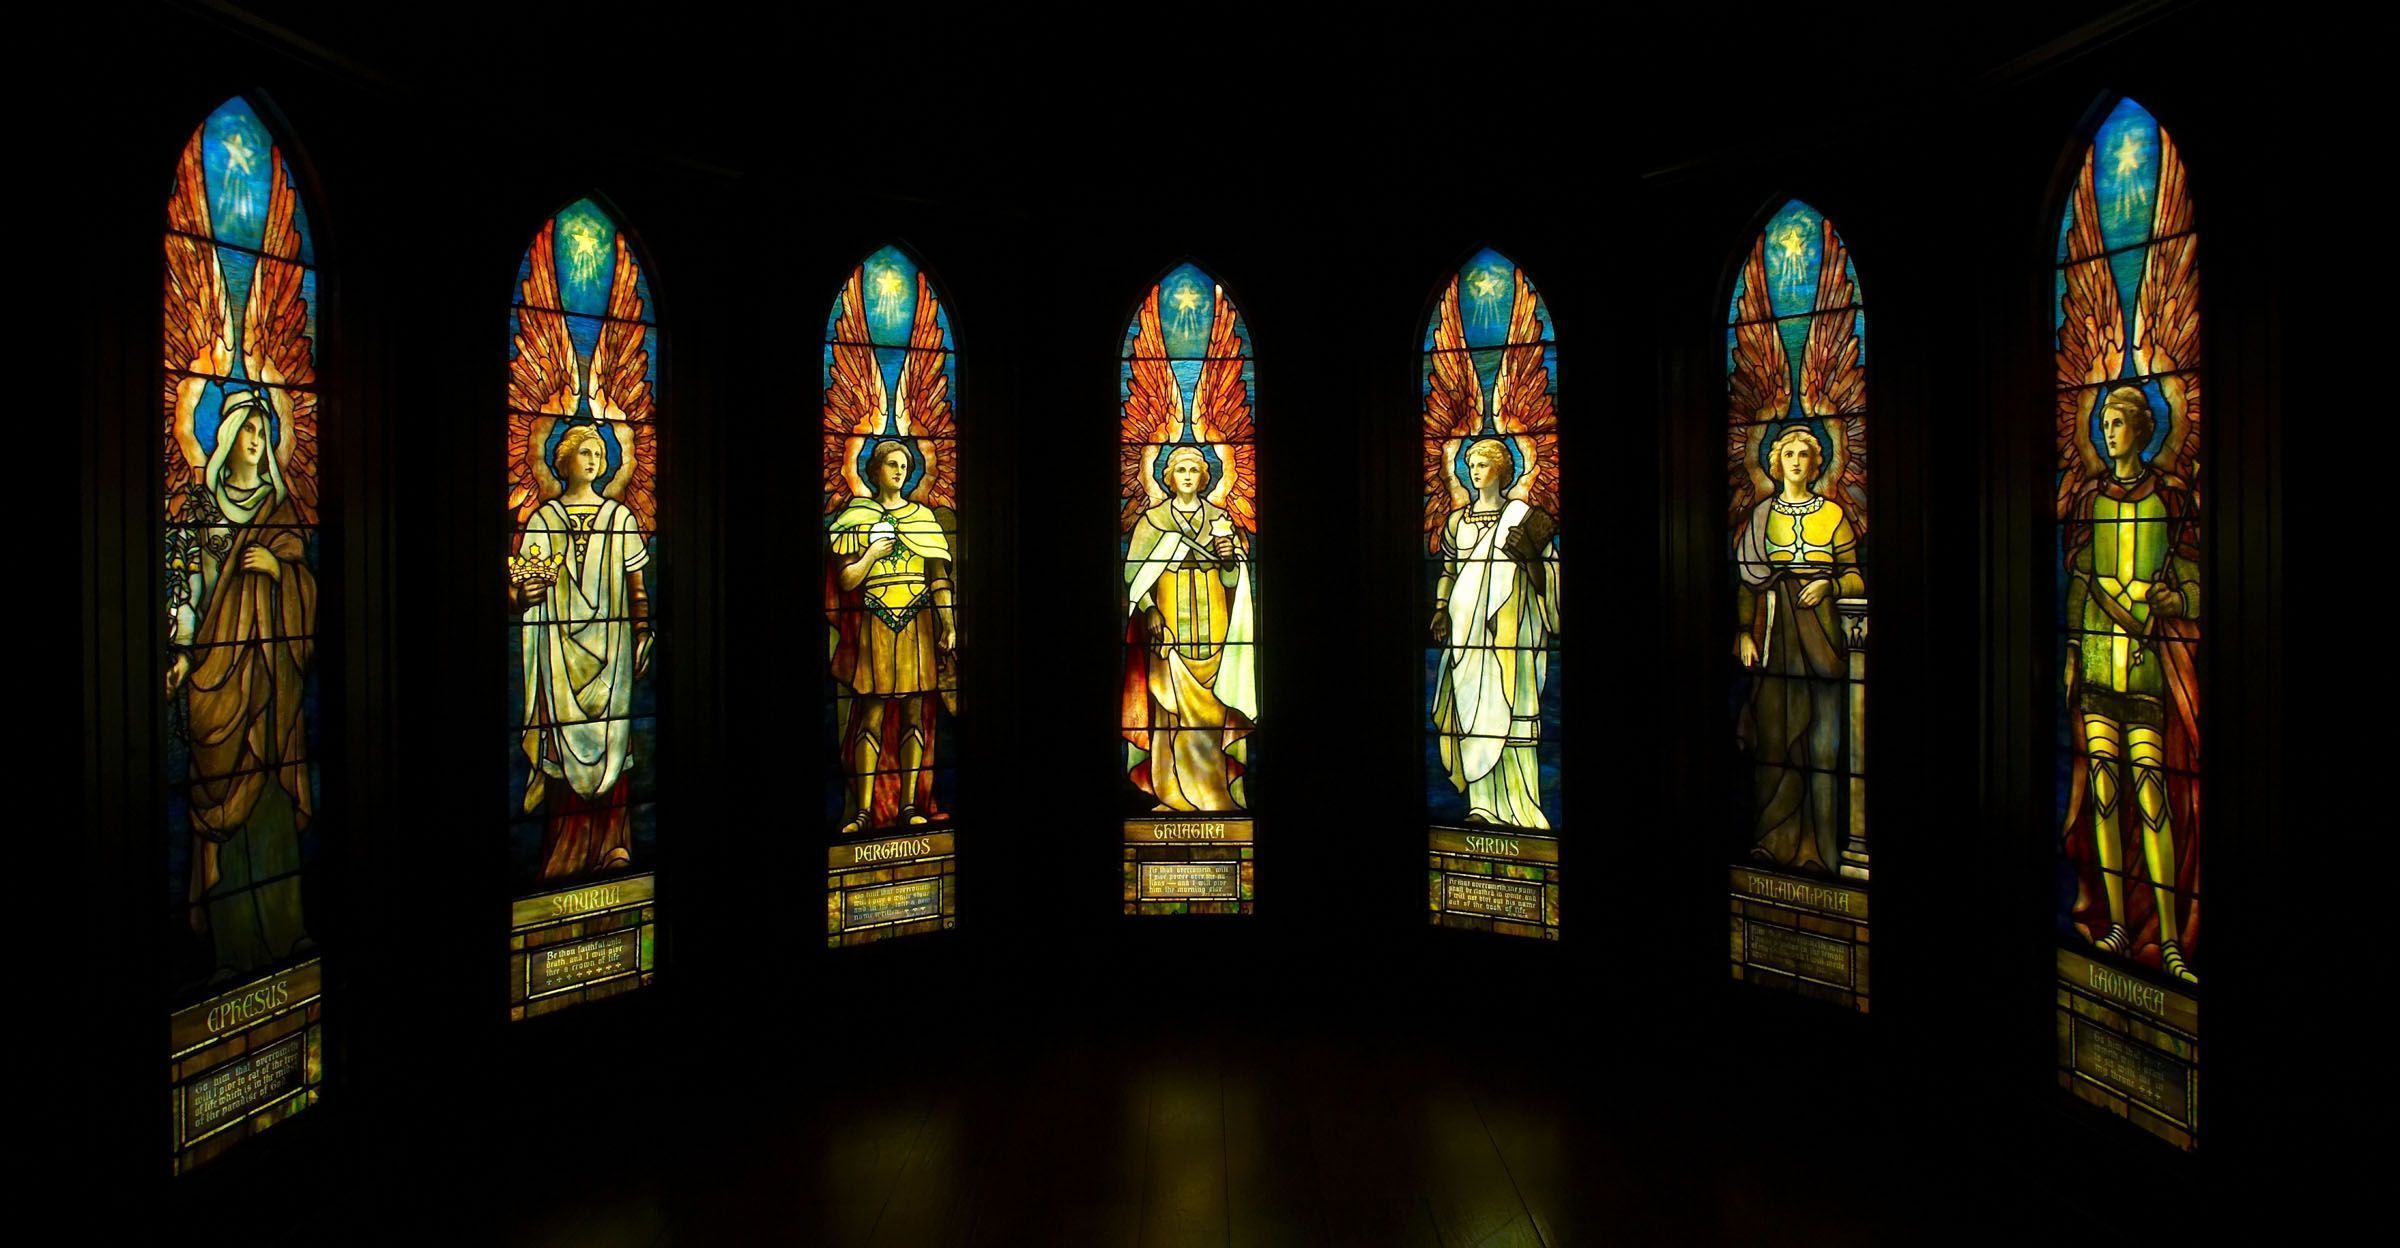 Stained glass art window religion f wallpaper | 2400x1248 | 182572 ...